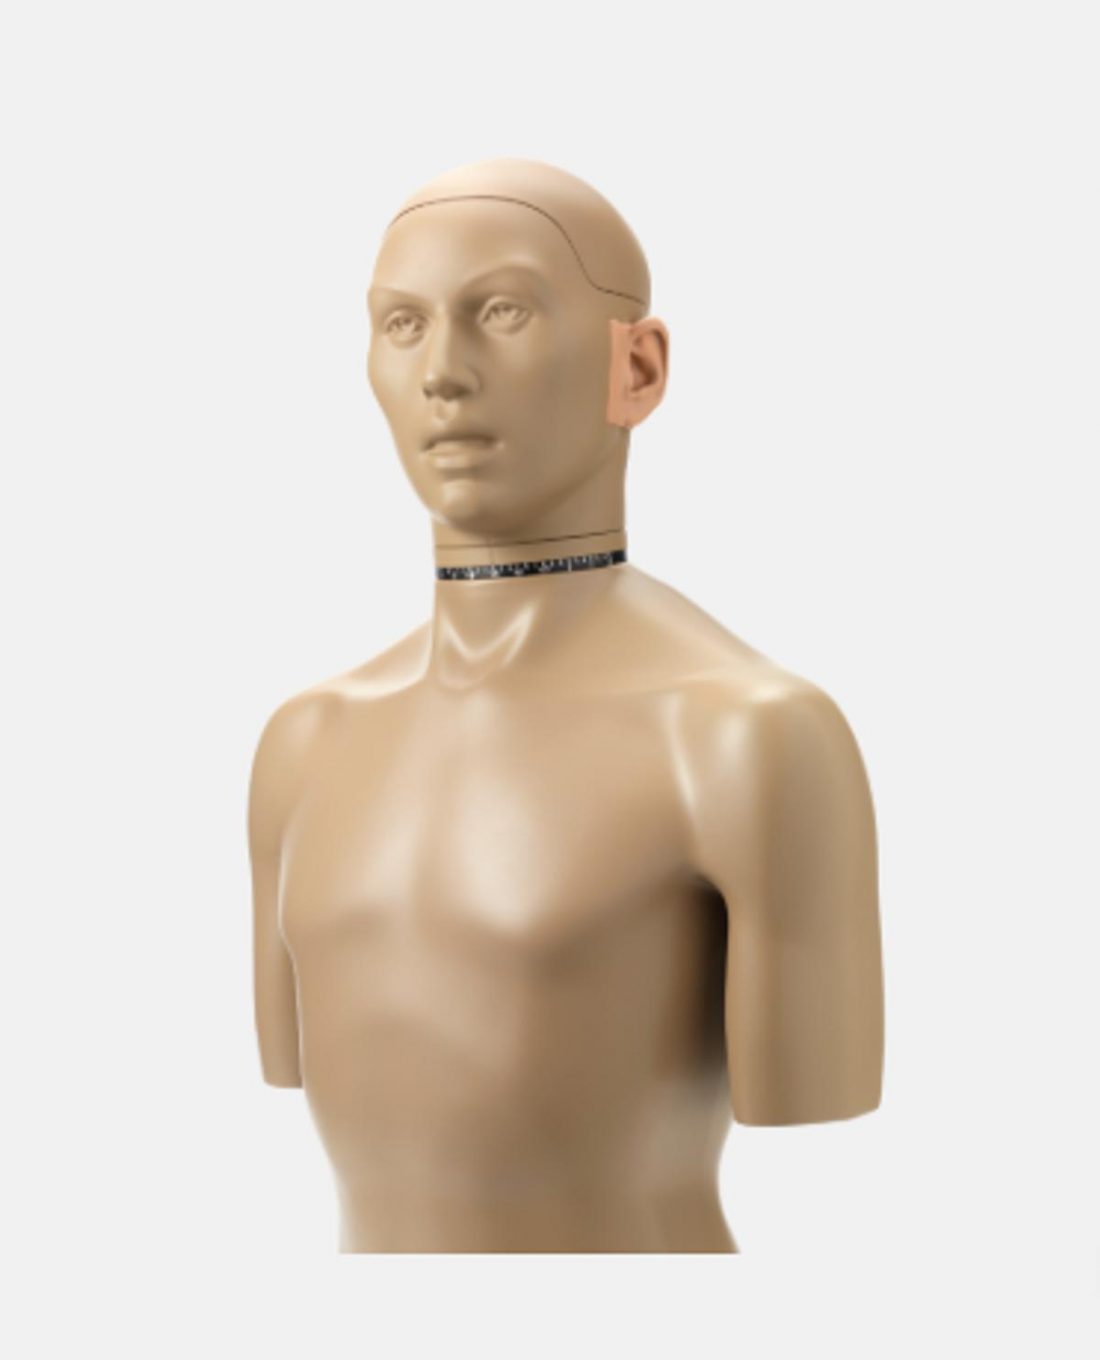 This is a industry-standard head and torso simulator, a specialised piece of equipment aimed to achieve the 